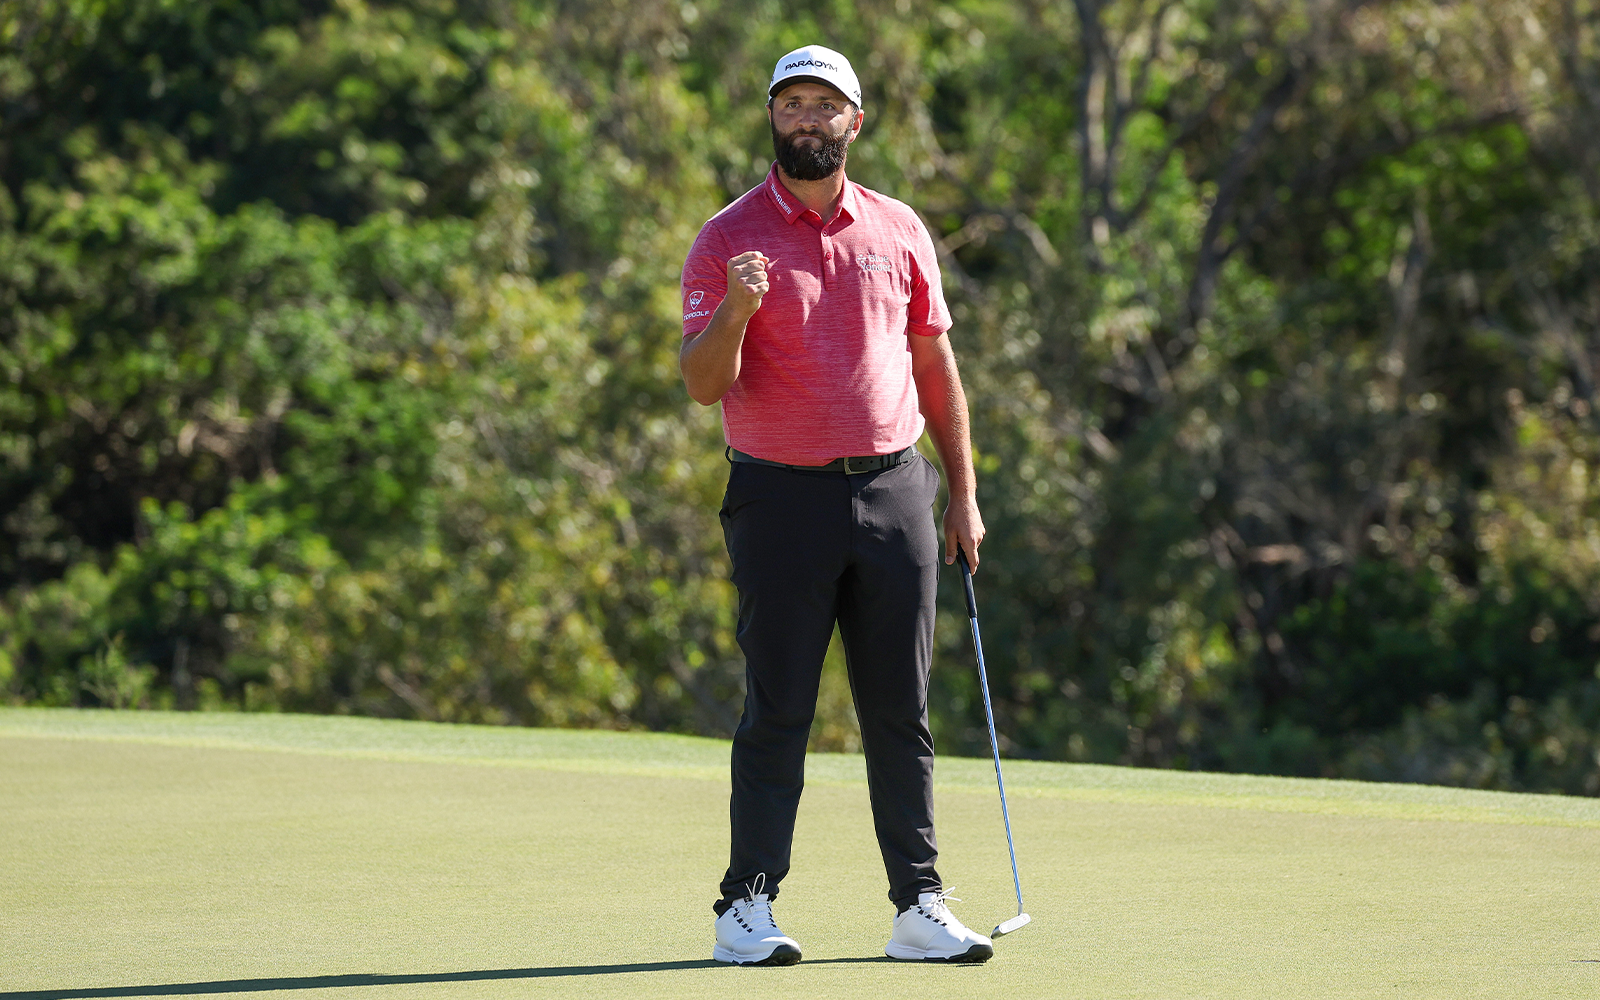 Jon Rahm of Spain celebrates after making his putt on the 18th green during the final round of the Sentry Tournament of Champions at Plantation Course at Kapalua Golf Club on January 08, 2023 in Lahaina, Hawaii. (Photo by Harry How/Getty Images)